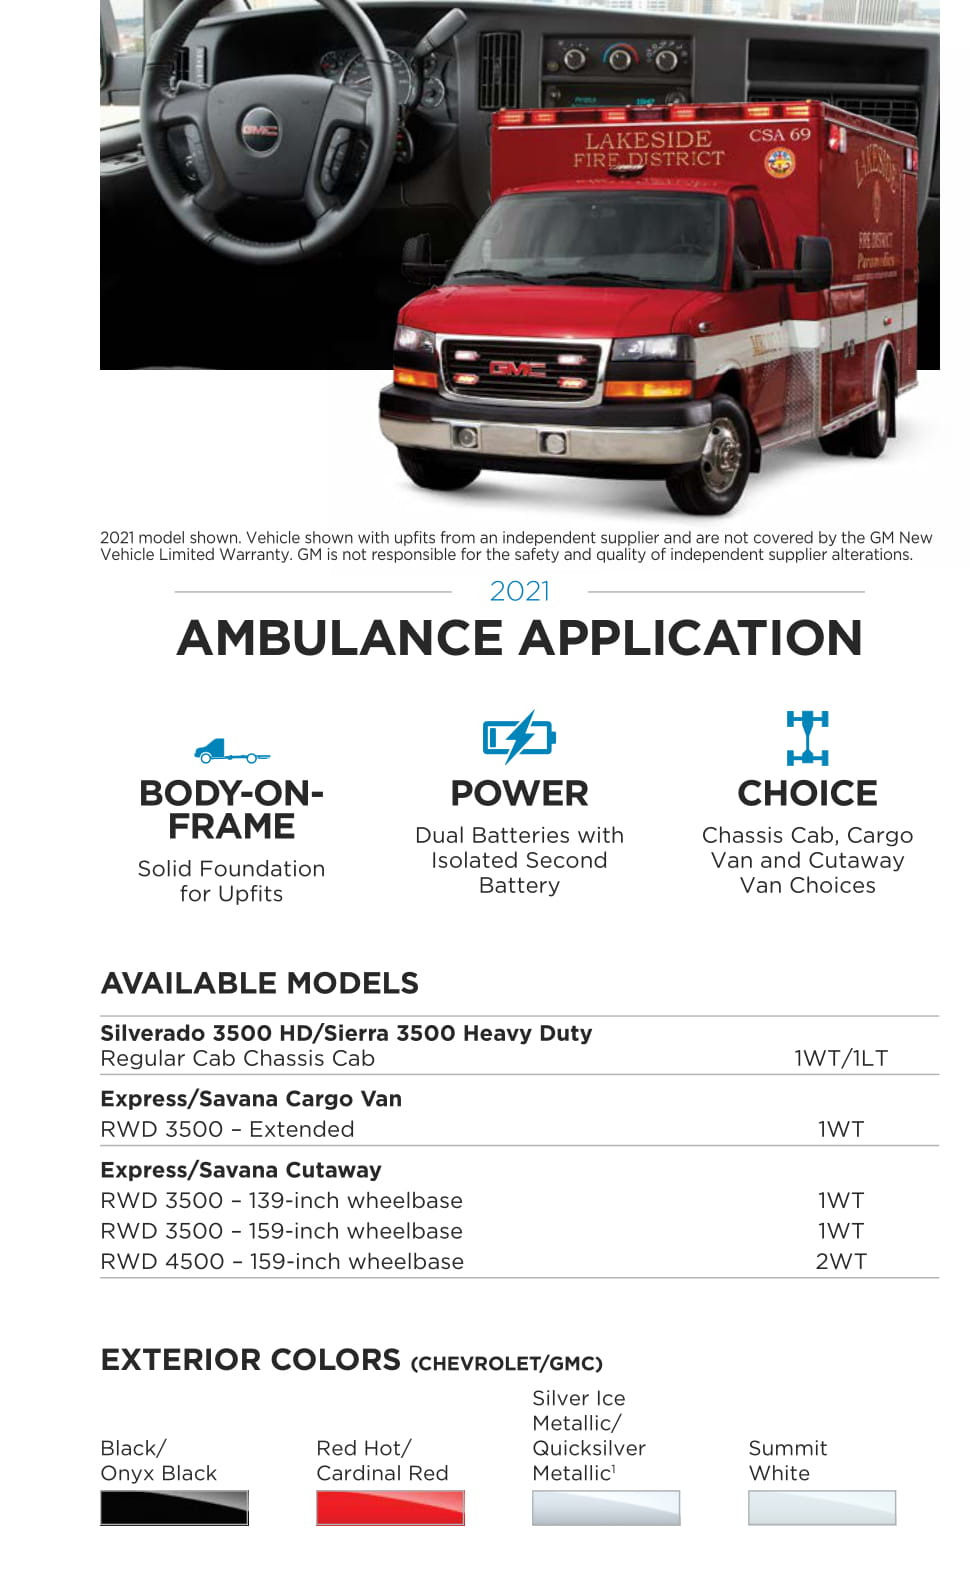 Exterior Colors for the GM Ambulance 3500 Vehicle in 2021